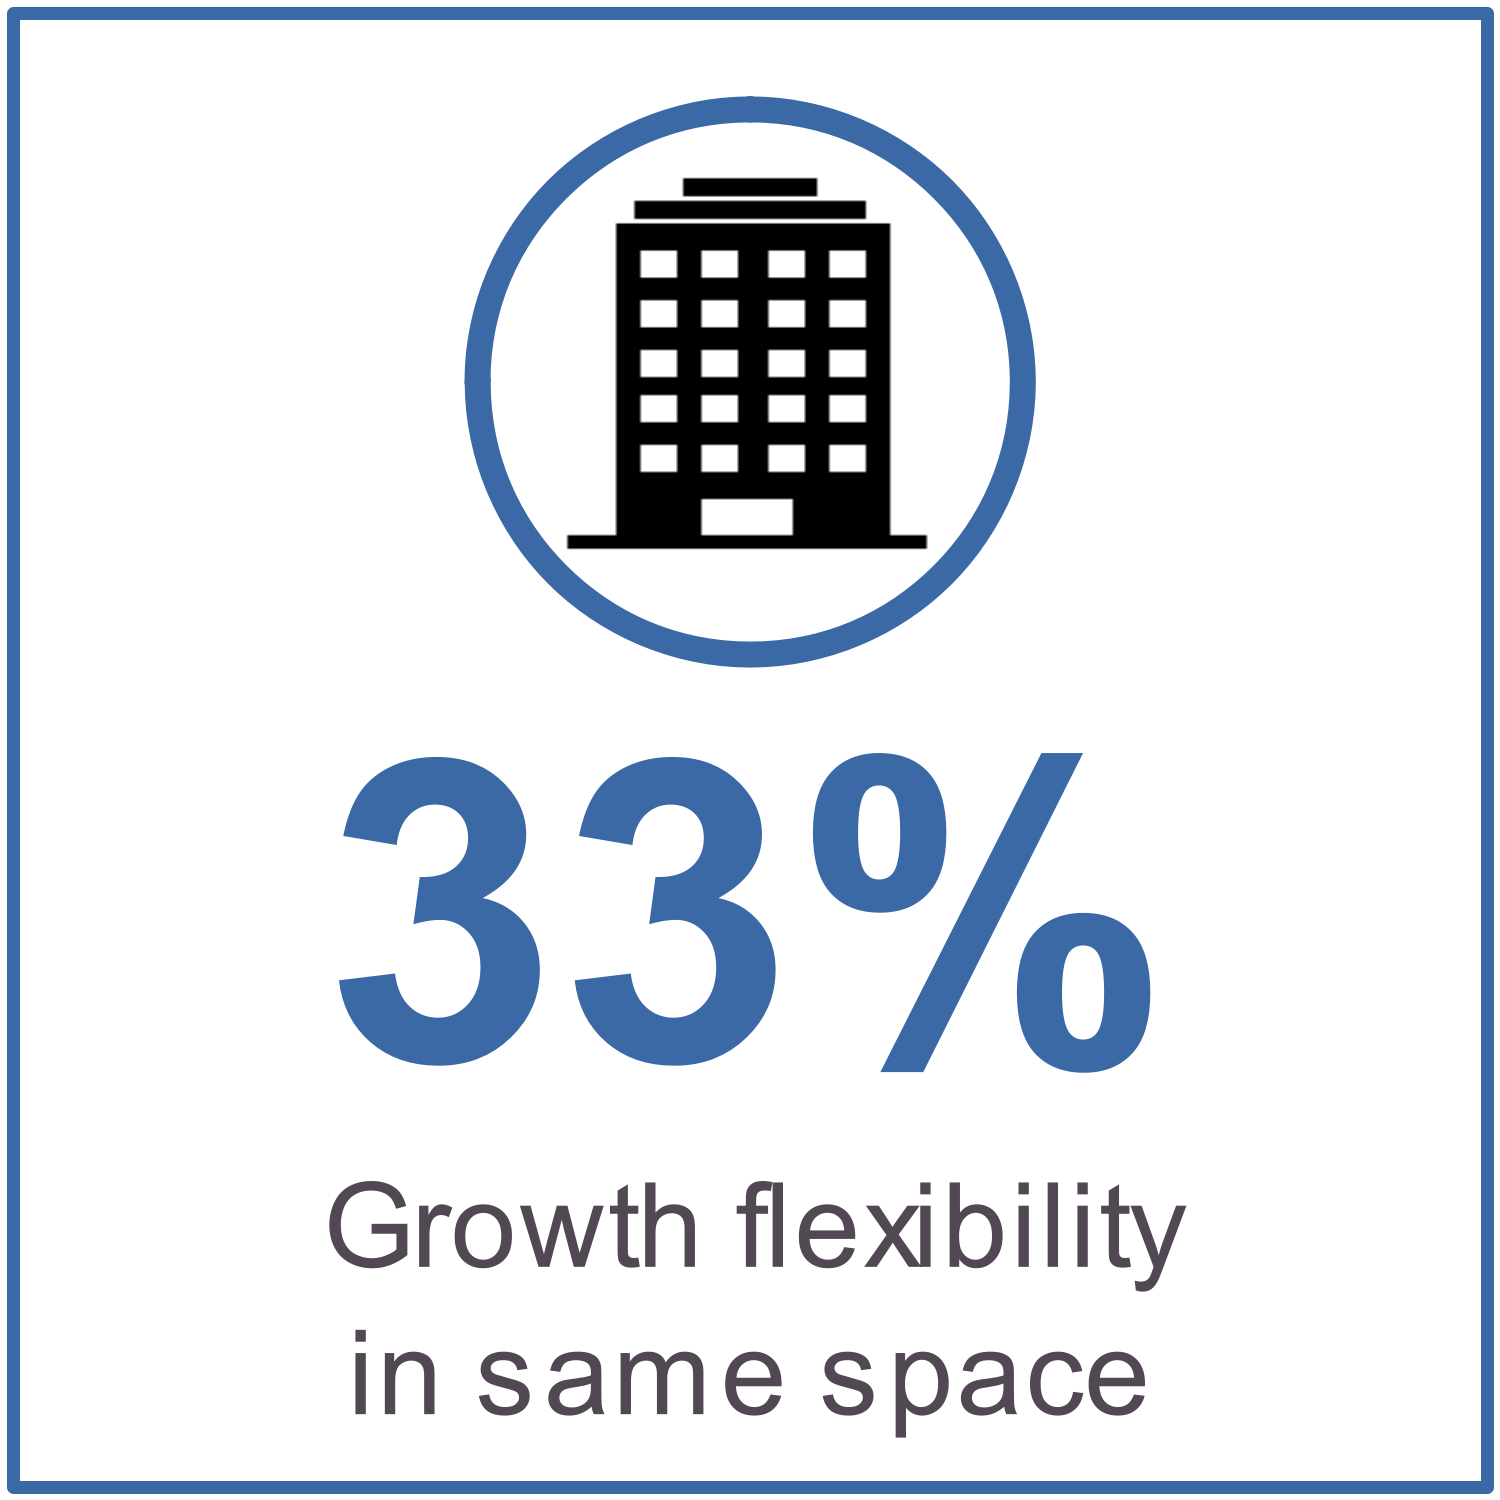 33% growth flexibility in same space